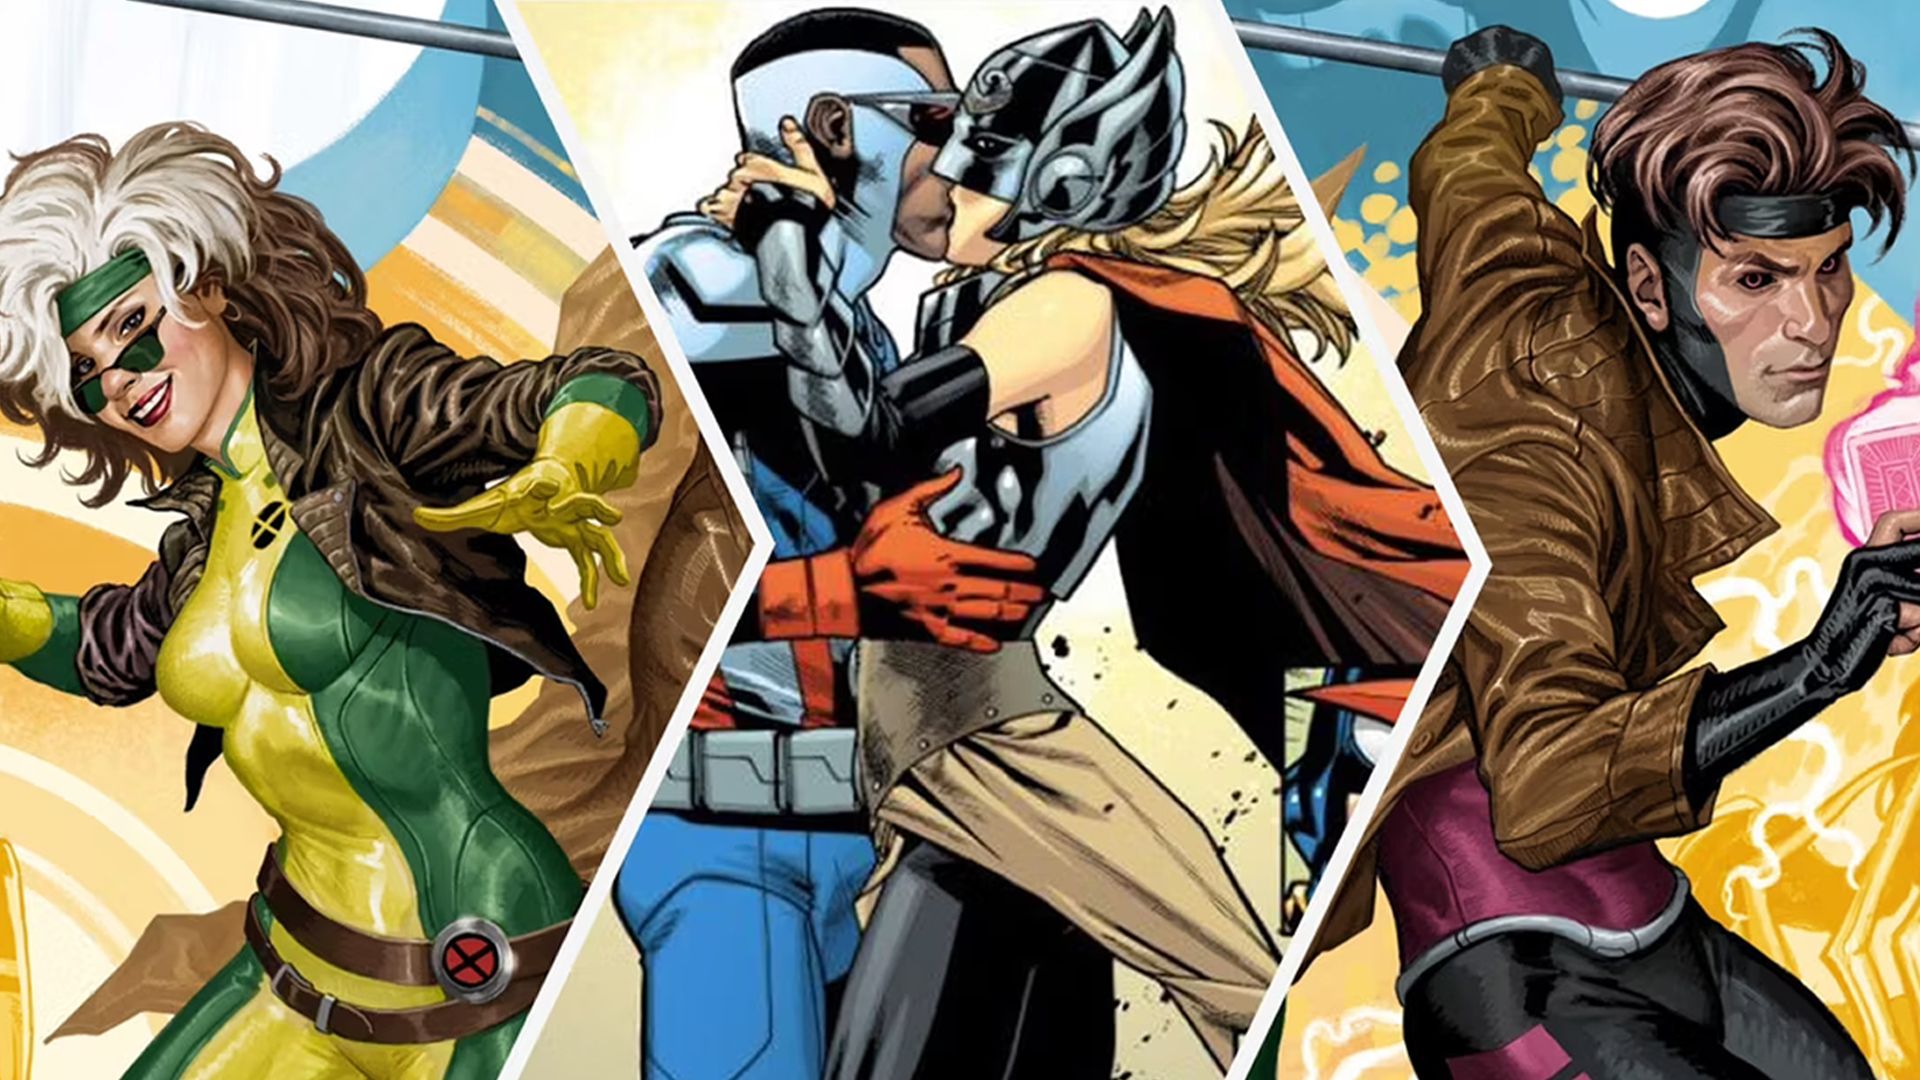 A split image featuring Rogue, Captain America (Sam Wilson) kissing Thor (Jane Foster), and Gambit